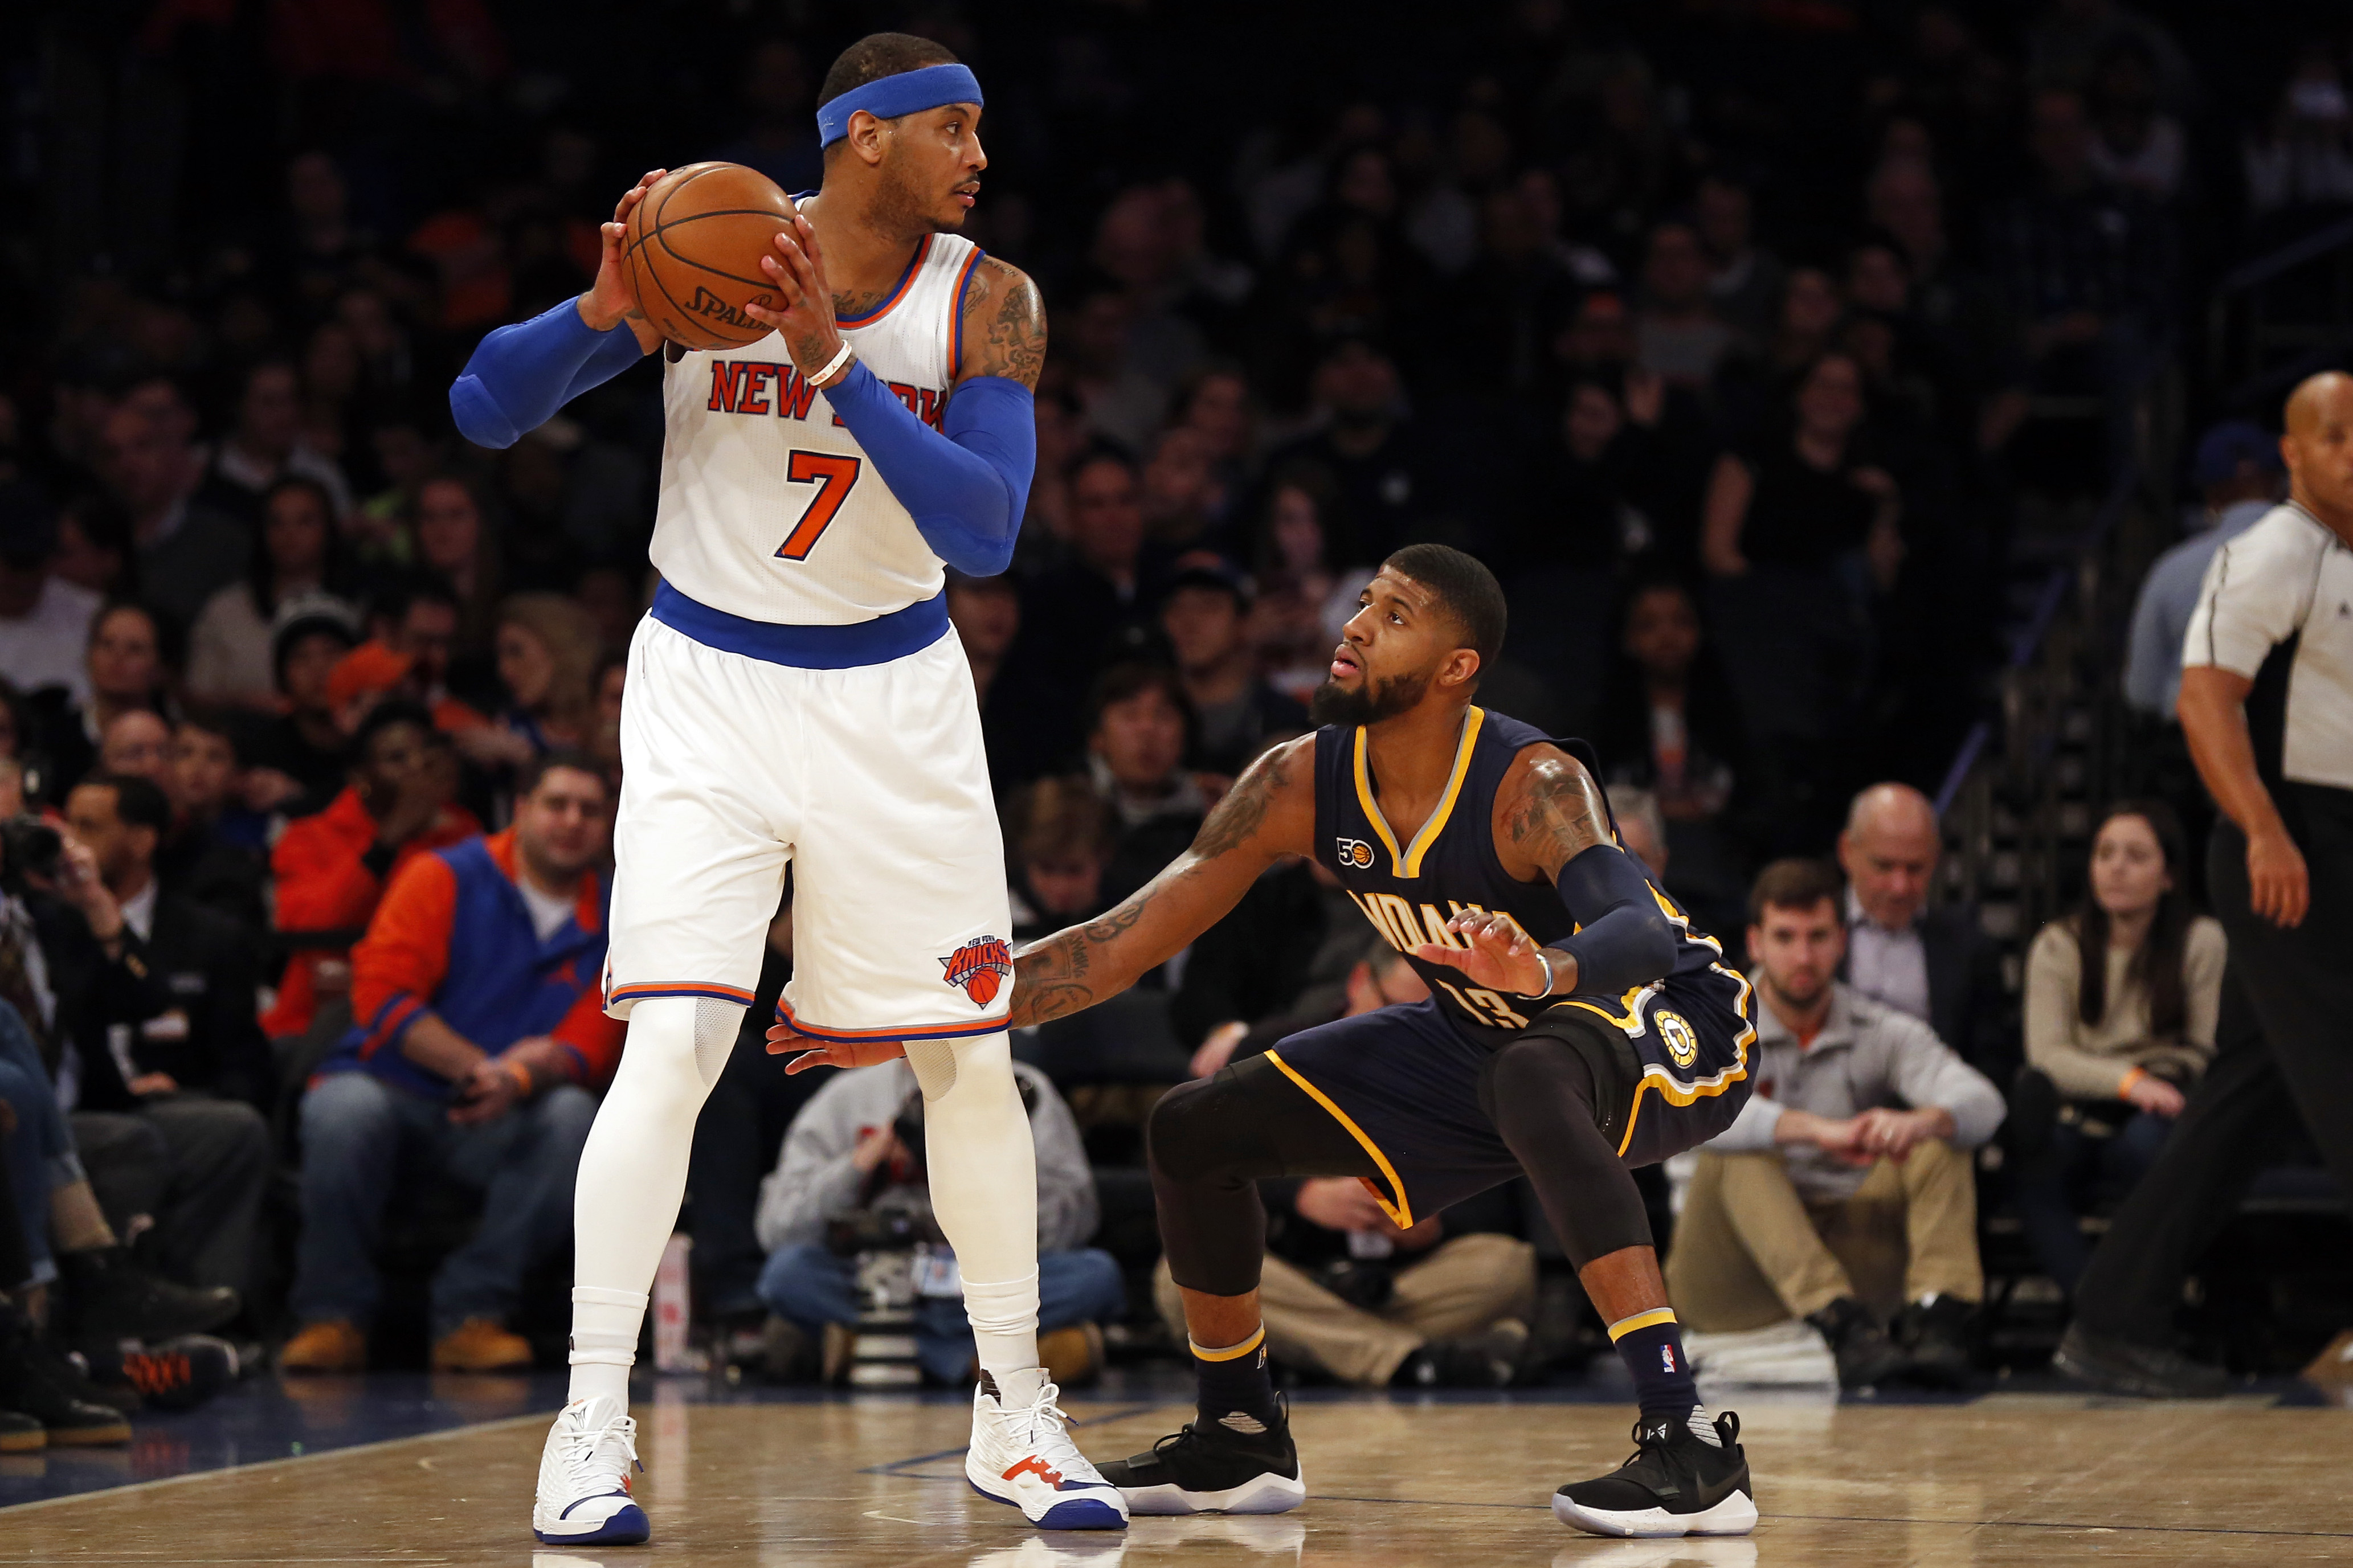 Indiana Pacers vs New York Knicks Recap, Highlights, Final Score, More